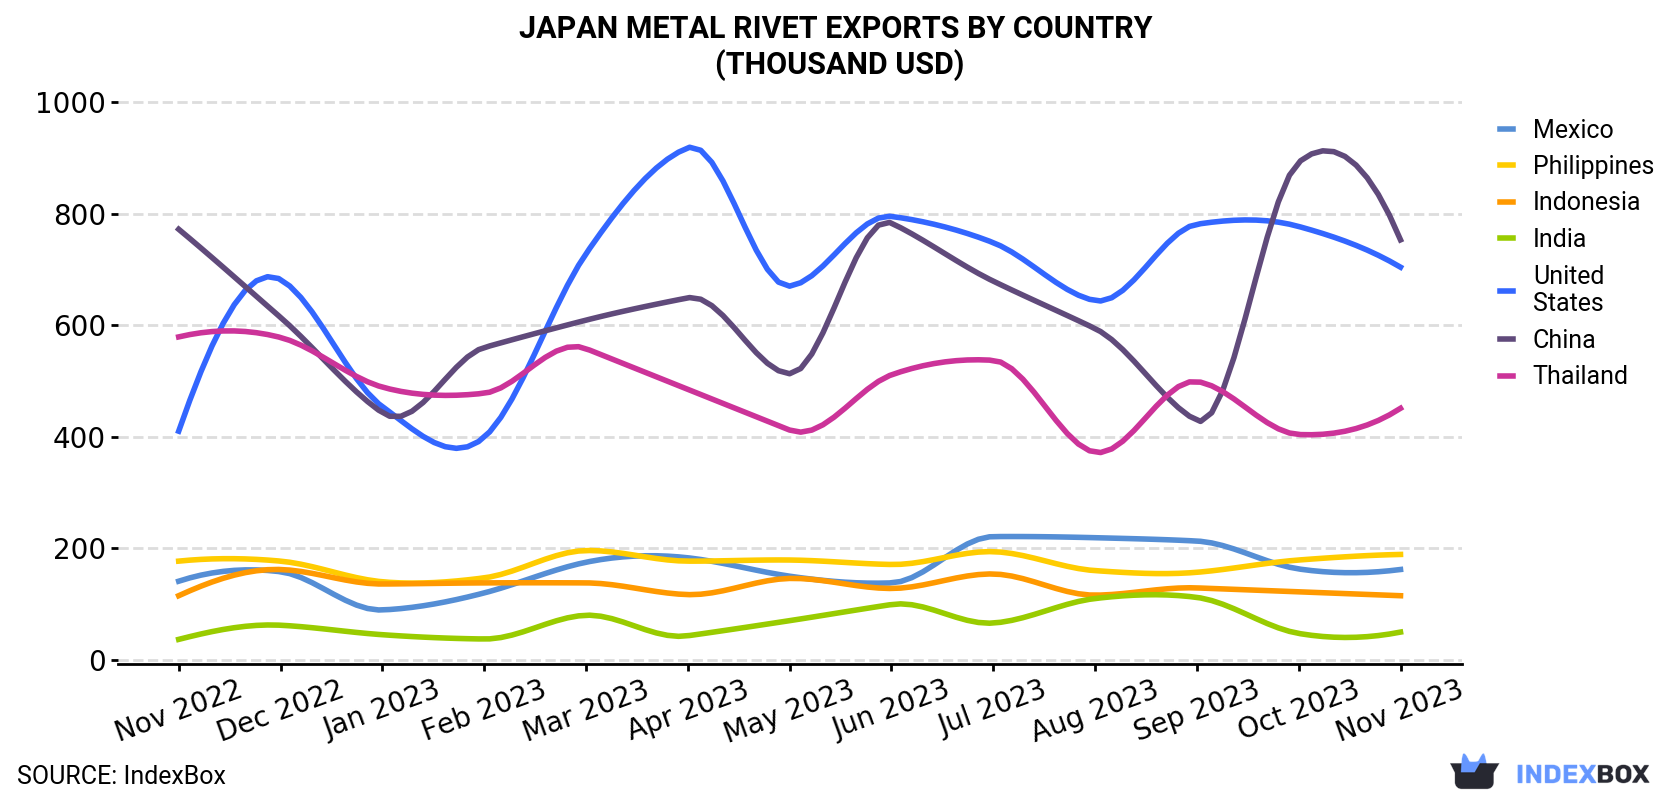 Japan Metal Rivet Exports By Country (Thousand USD)